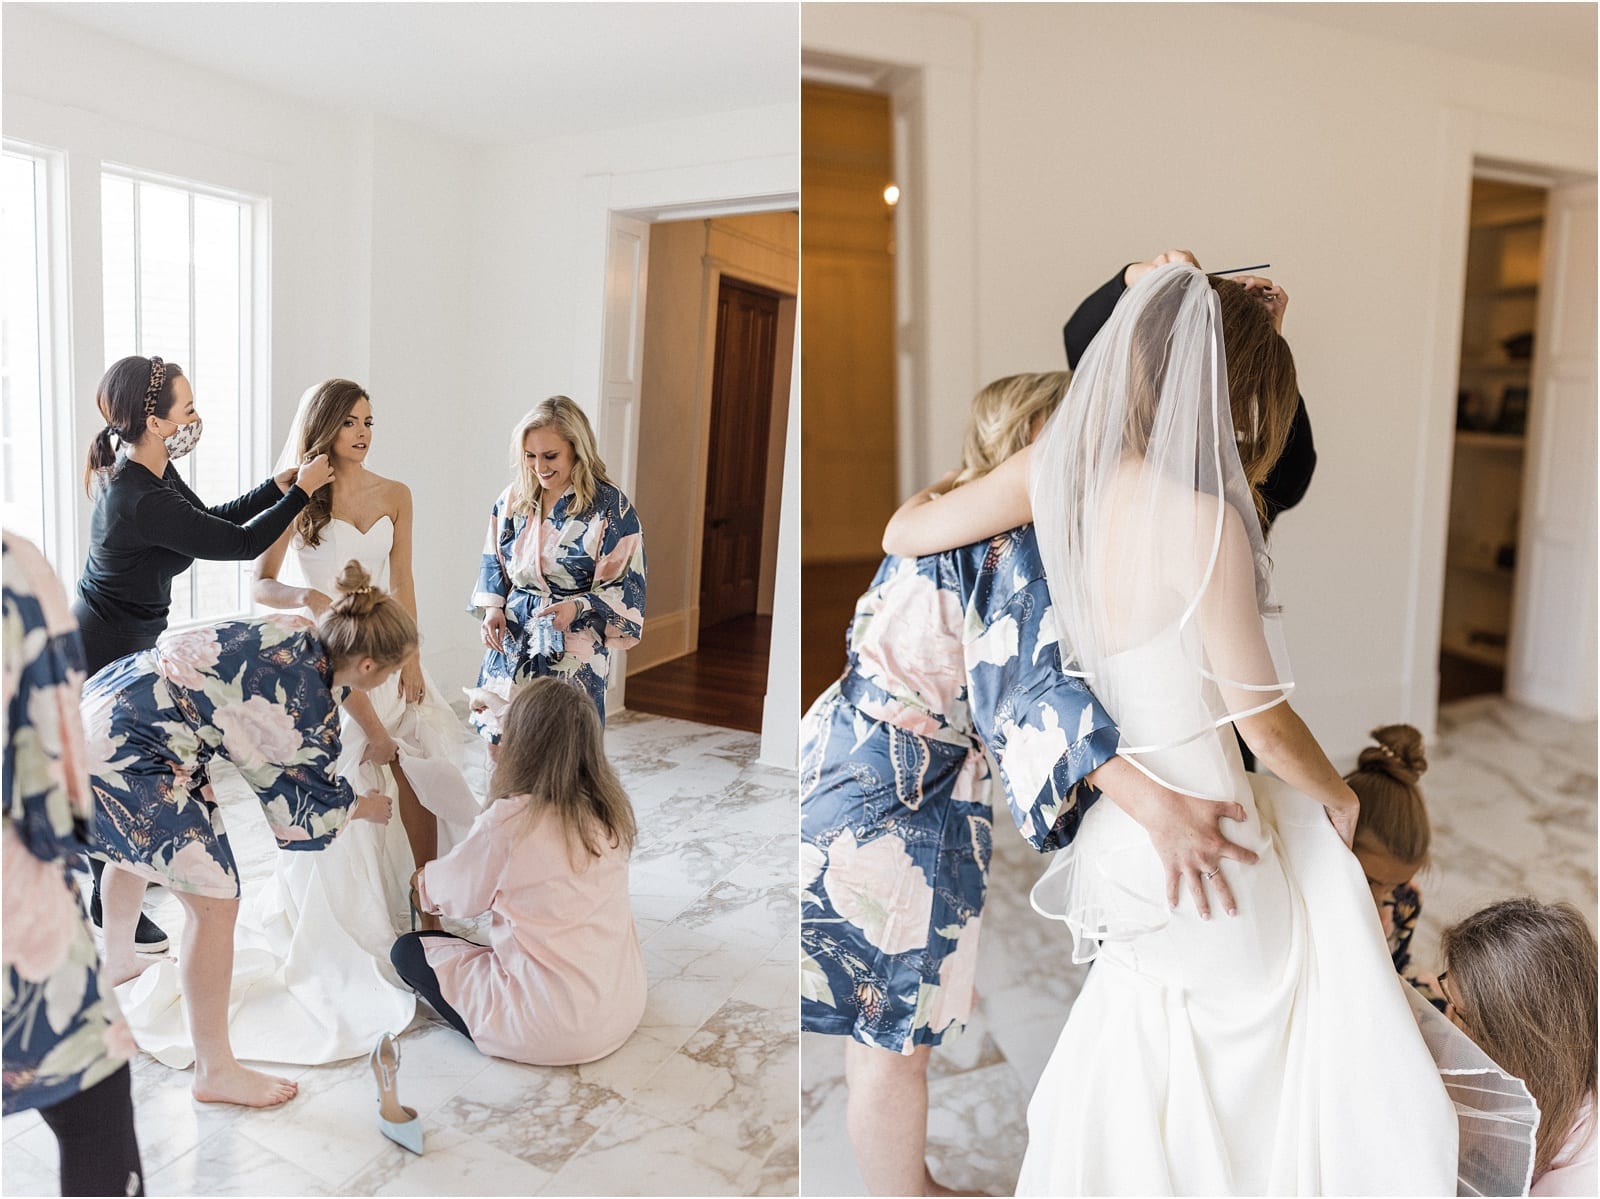 bridesmaids help with finishing touches on the bride